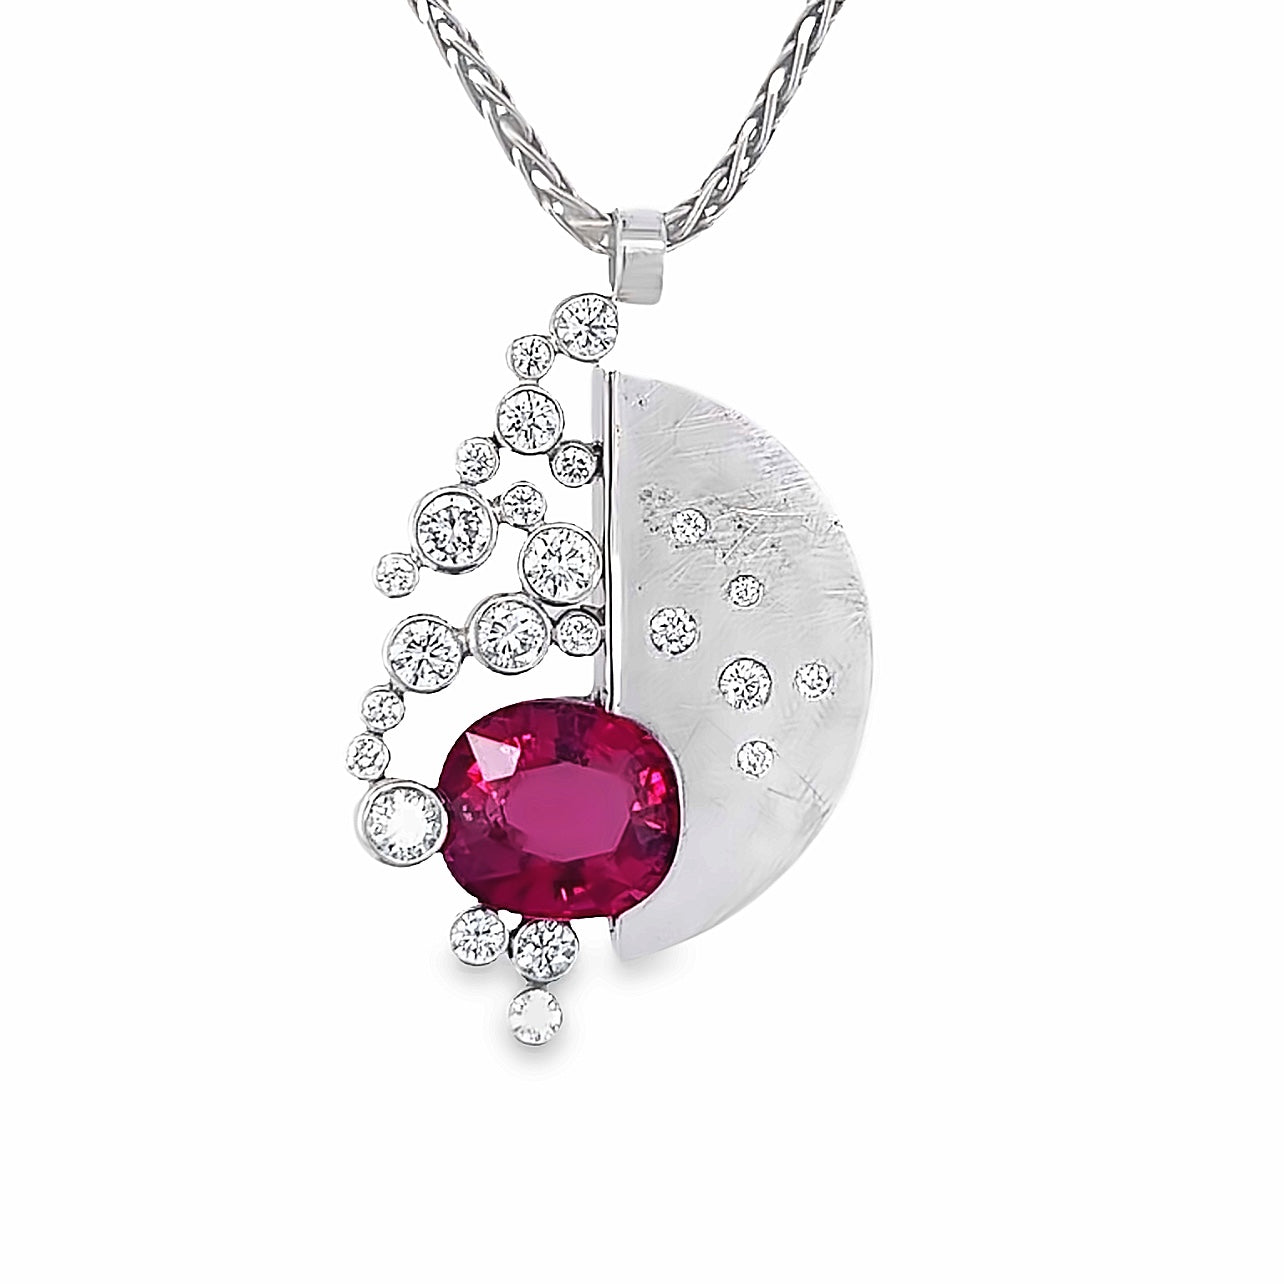 Custom 14k White Gold Oval Red Tourmaline and Diamond Pendant by Paul Richter